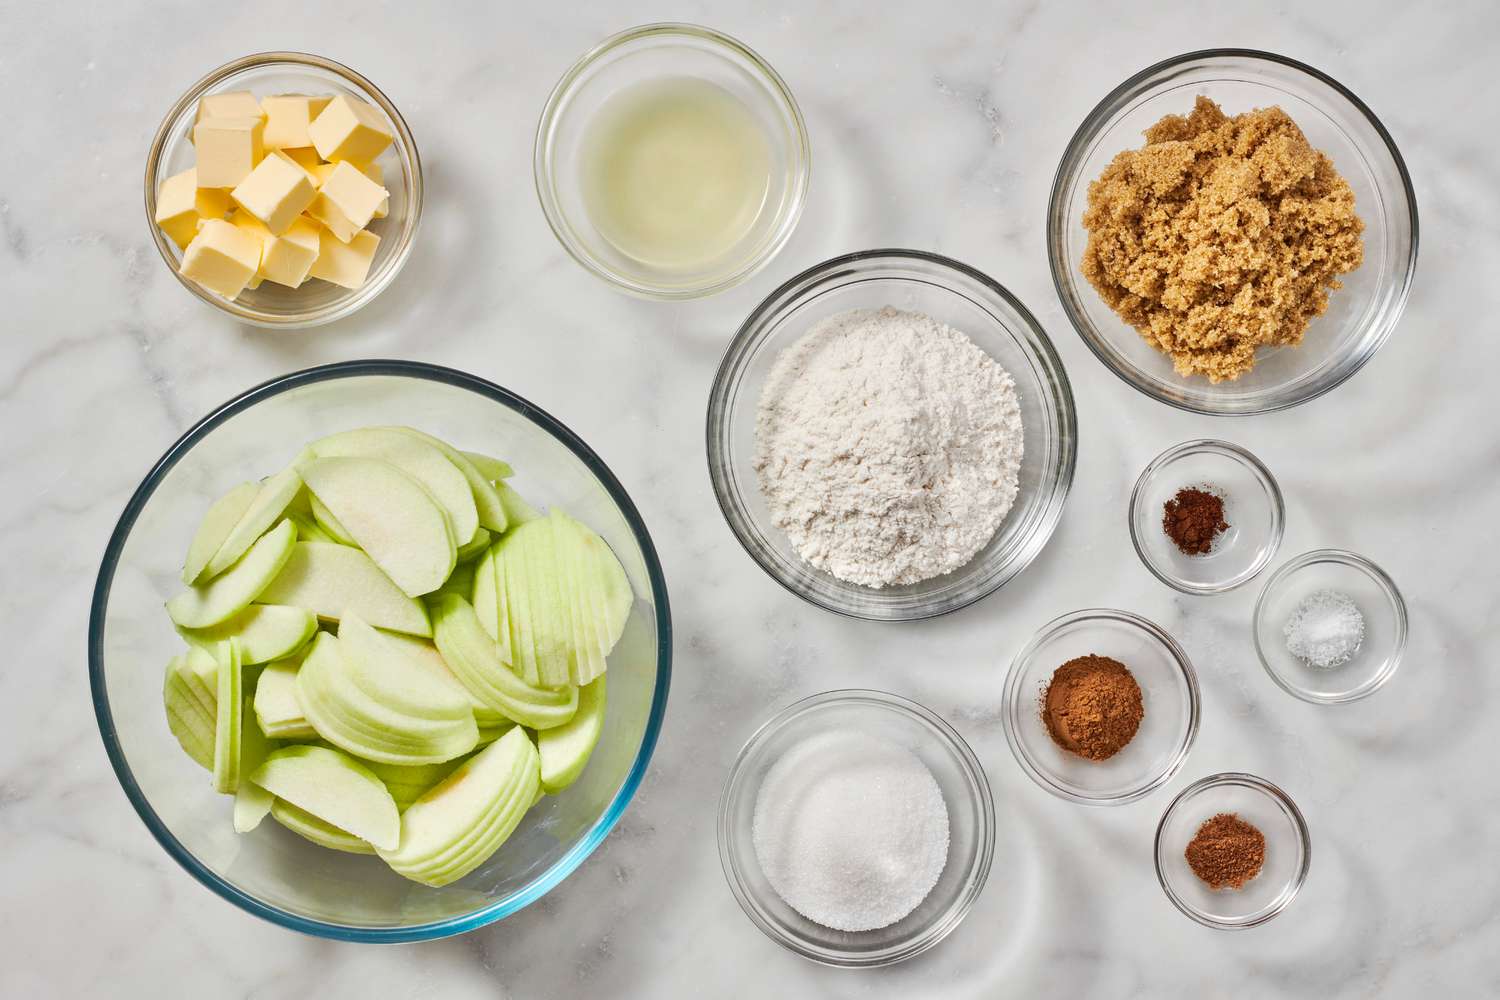 Ingredients to make apple brown betty